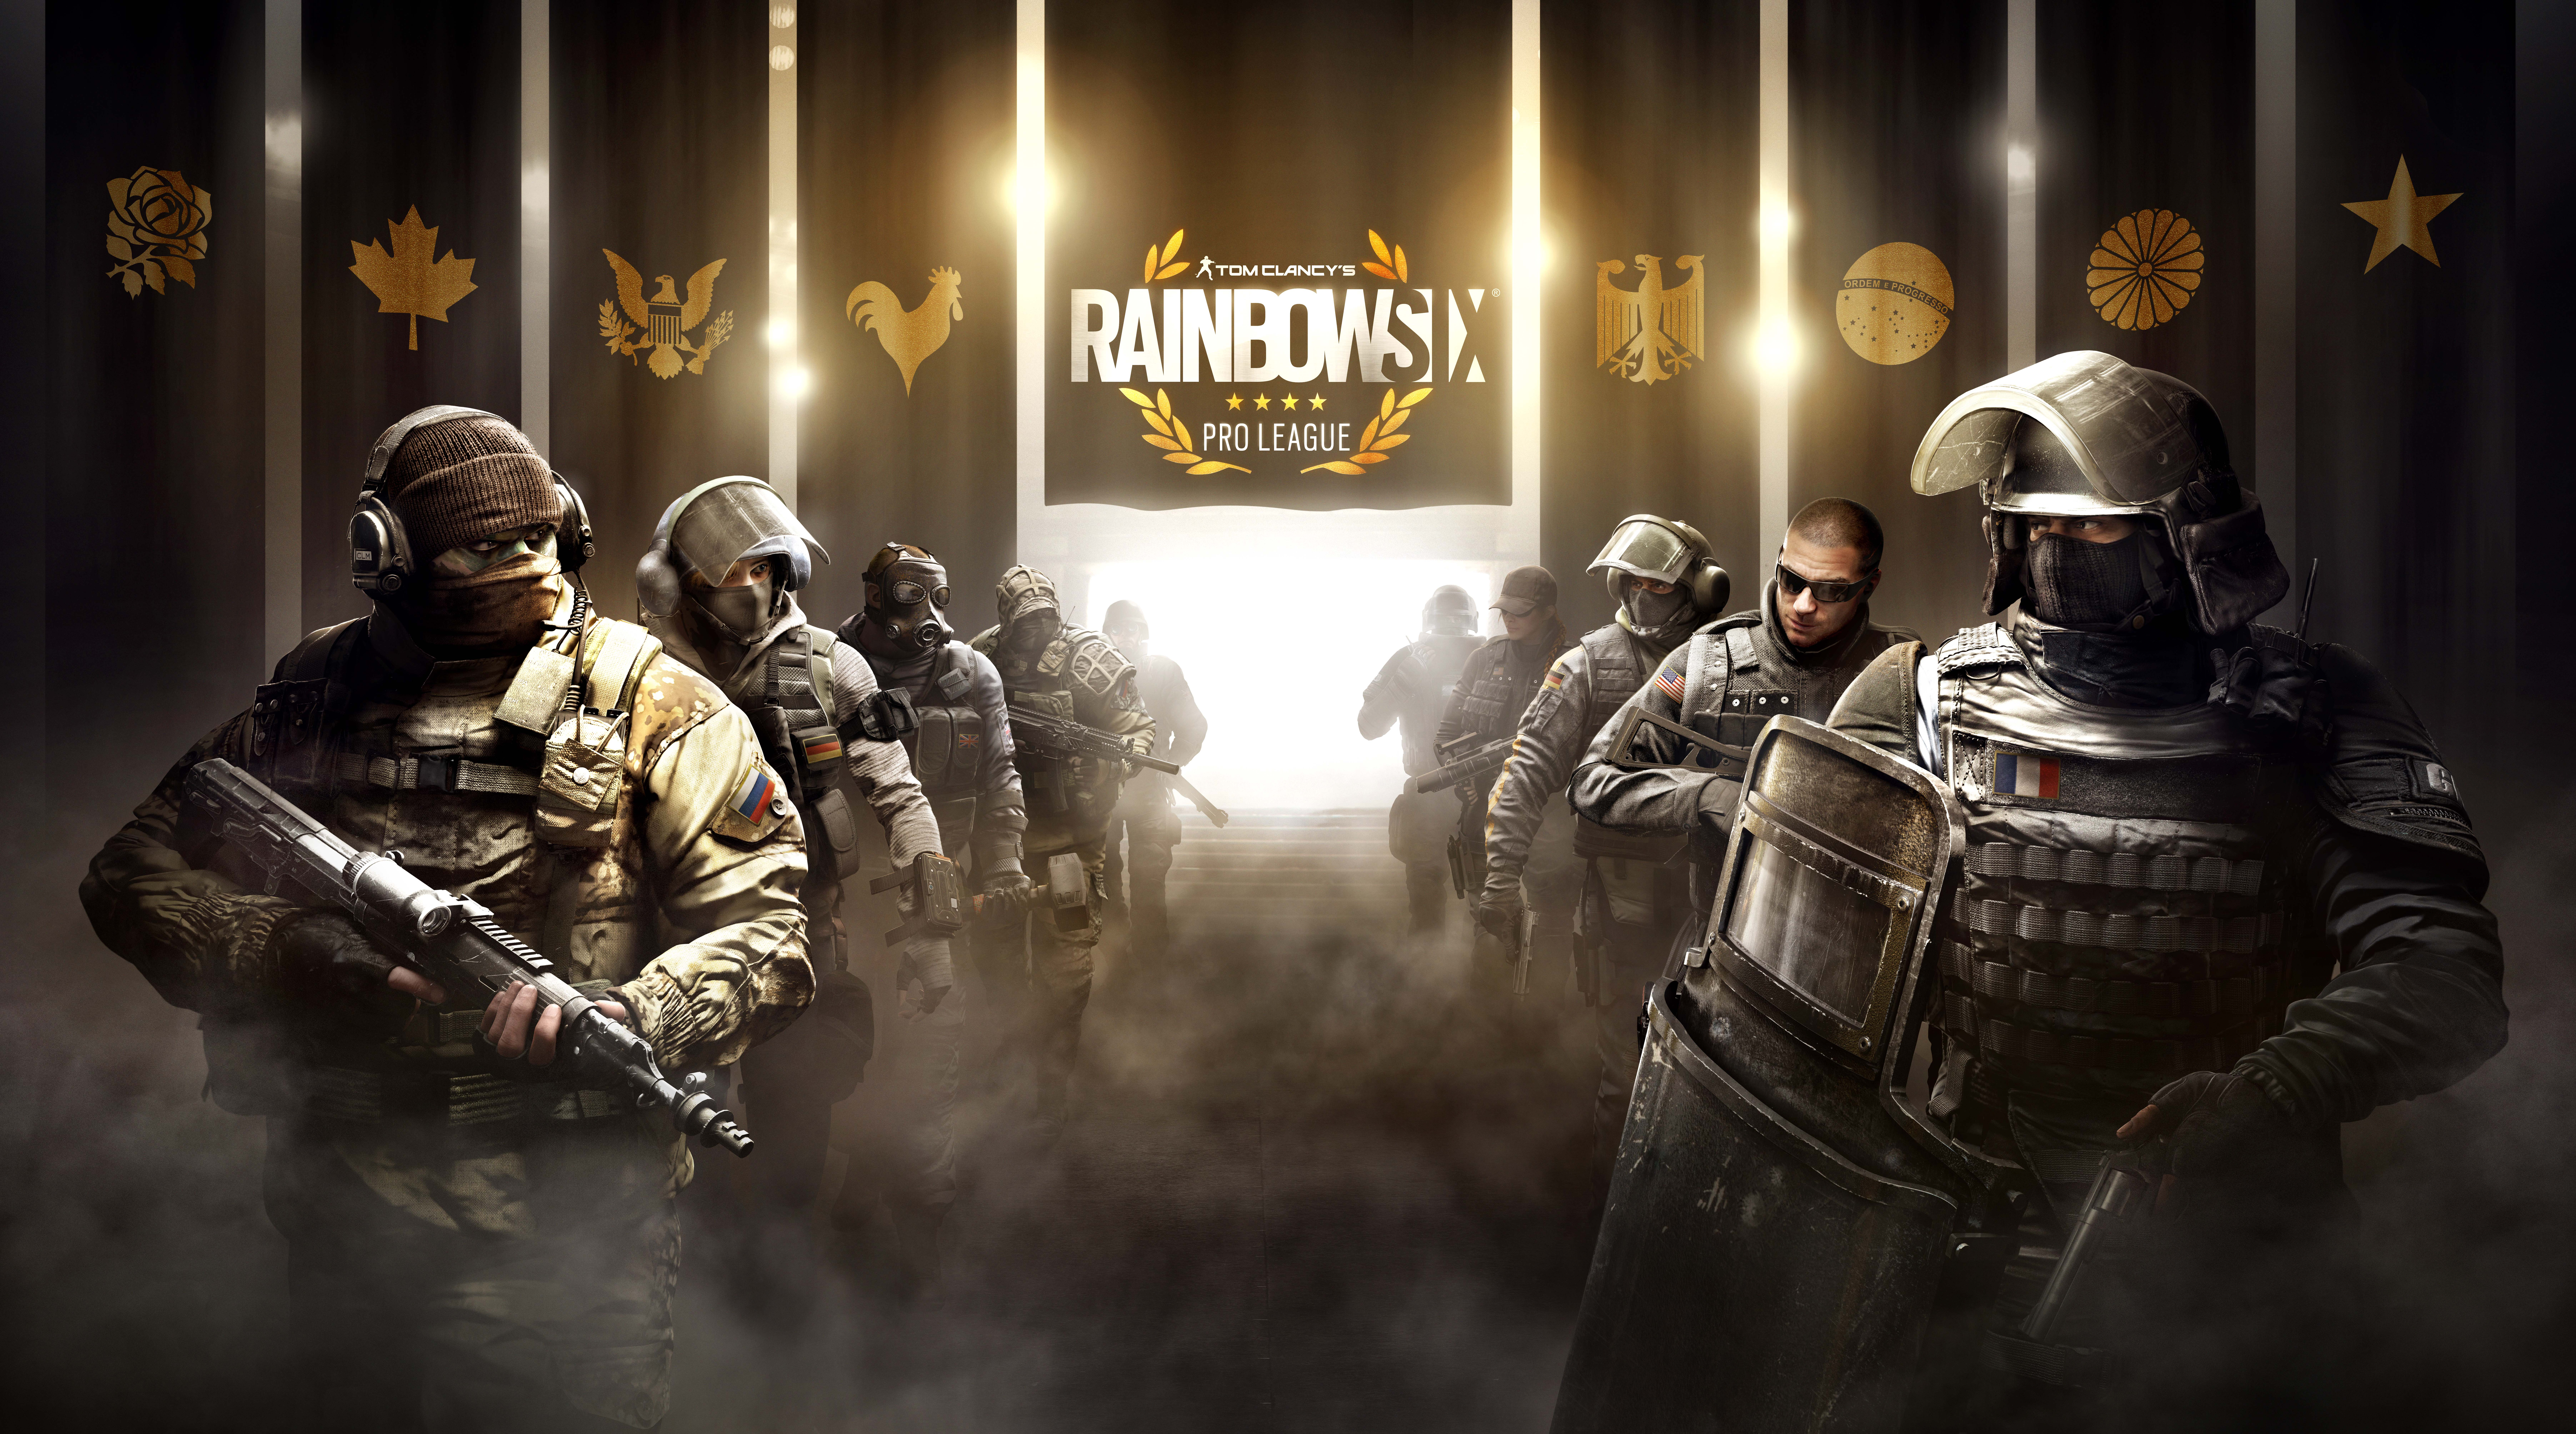 General 14424x8030 Rainbow Six: Siege Tom Clancy's video games tactical special forces Ubisoft Ash (Rainbow Six: Siege) video game characters